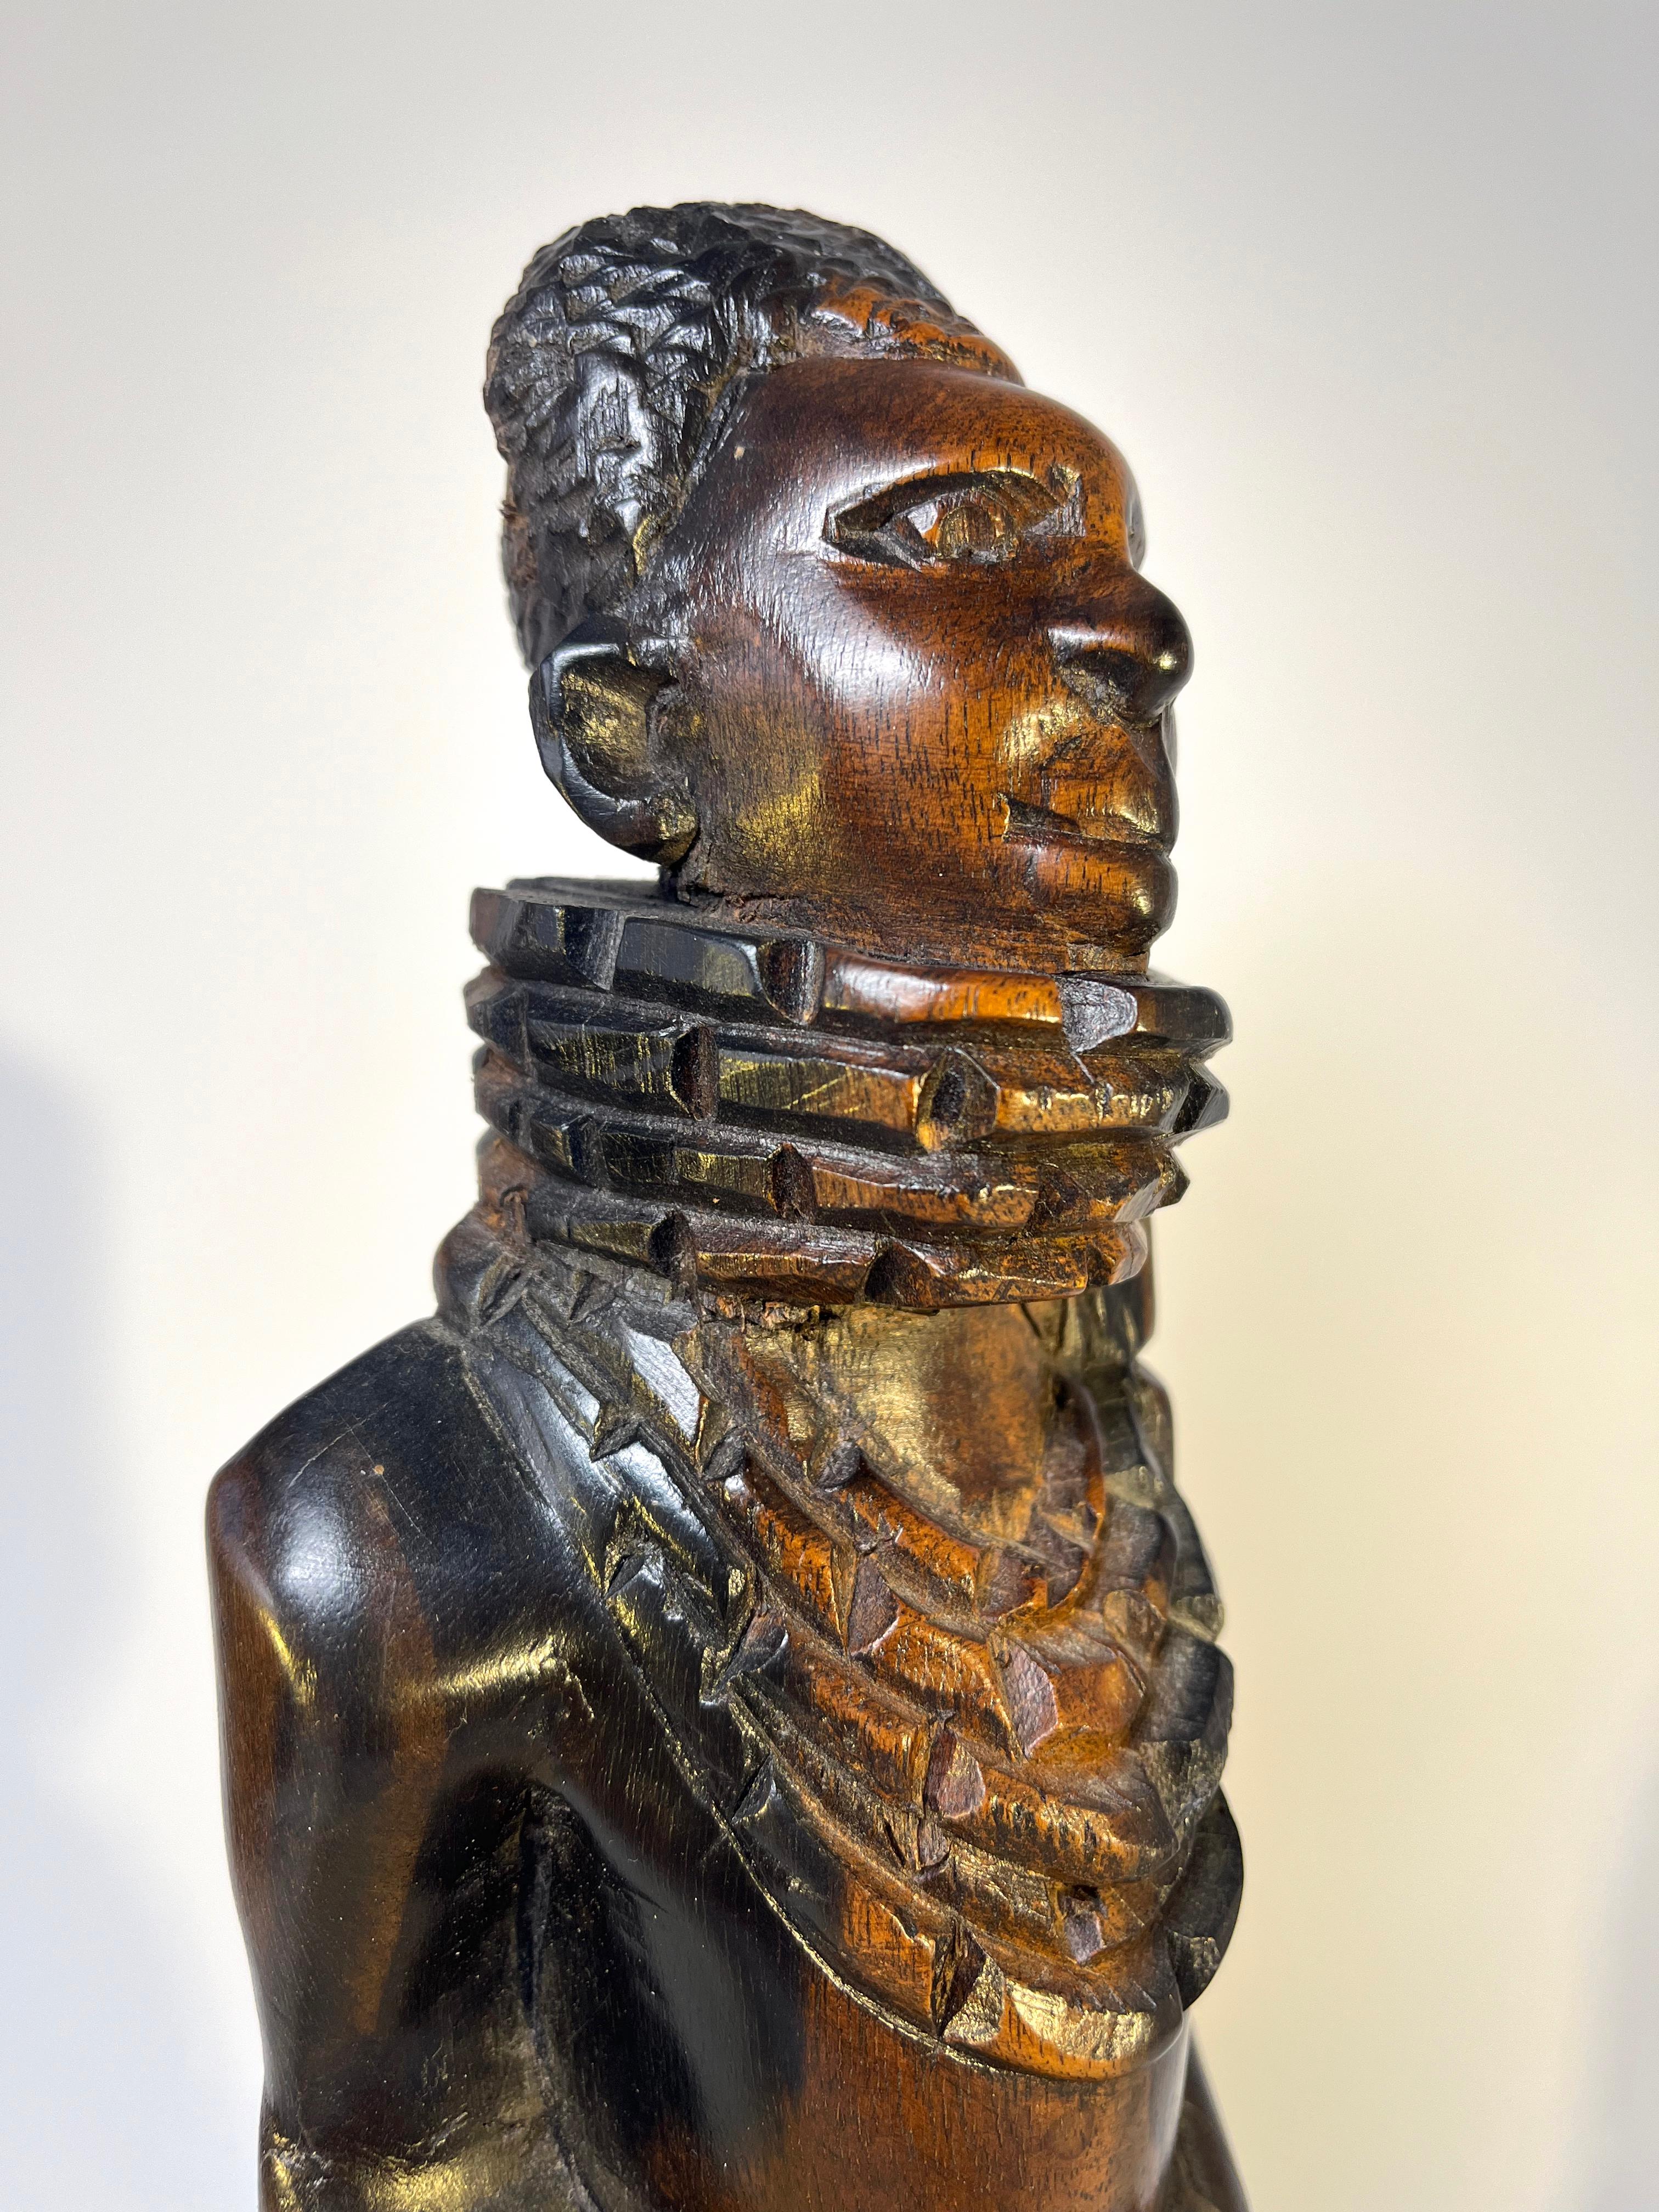 Beninese Benin Kingdom Ebony Carving of a Young King Oba, Nigerian For Sale